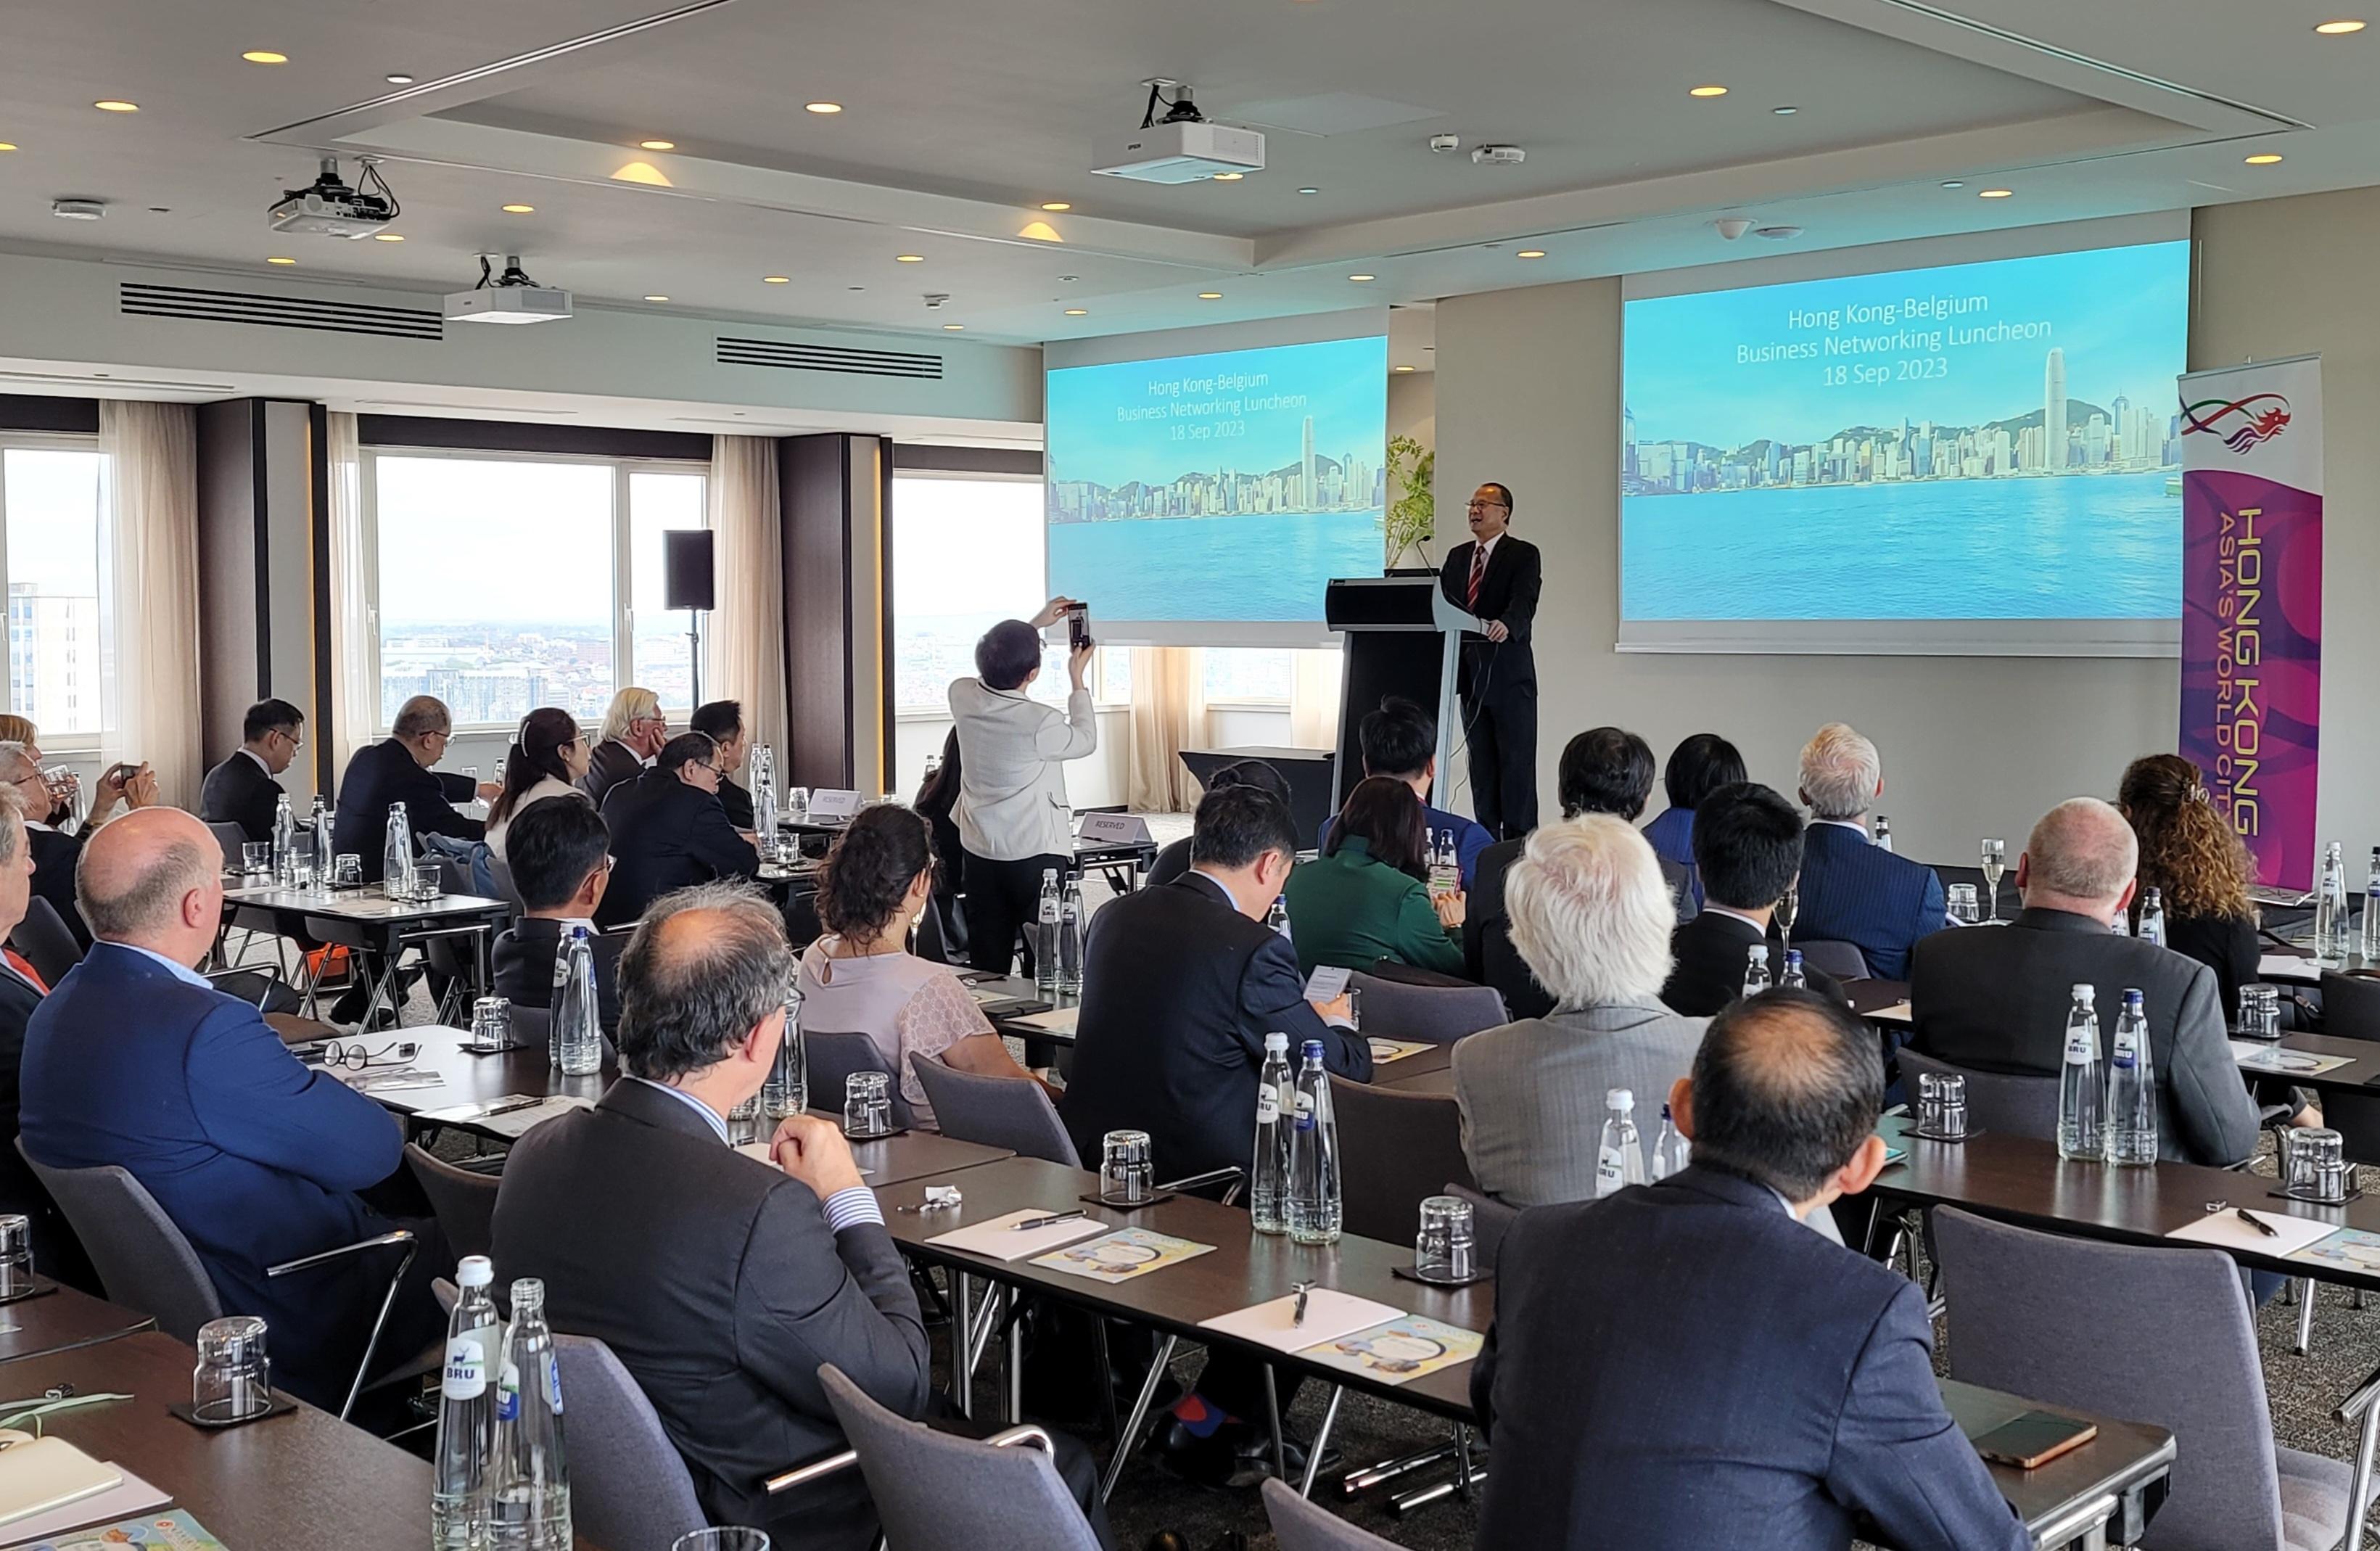 The Chairman of the Chinese General Chamber of Commerce, Dr Jonathan Choi, gave Belgian entrepreneurs insight into opportunities offered by Hong Kong as a regional gateway at the Hong Kong-Belgium business networking luncheon held on September 18 (Brussels time).